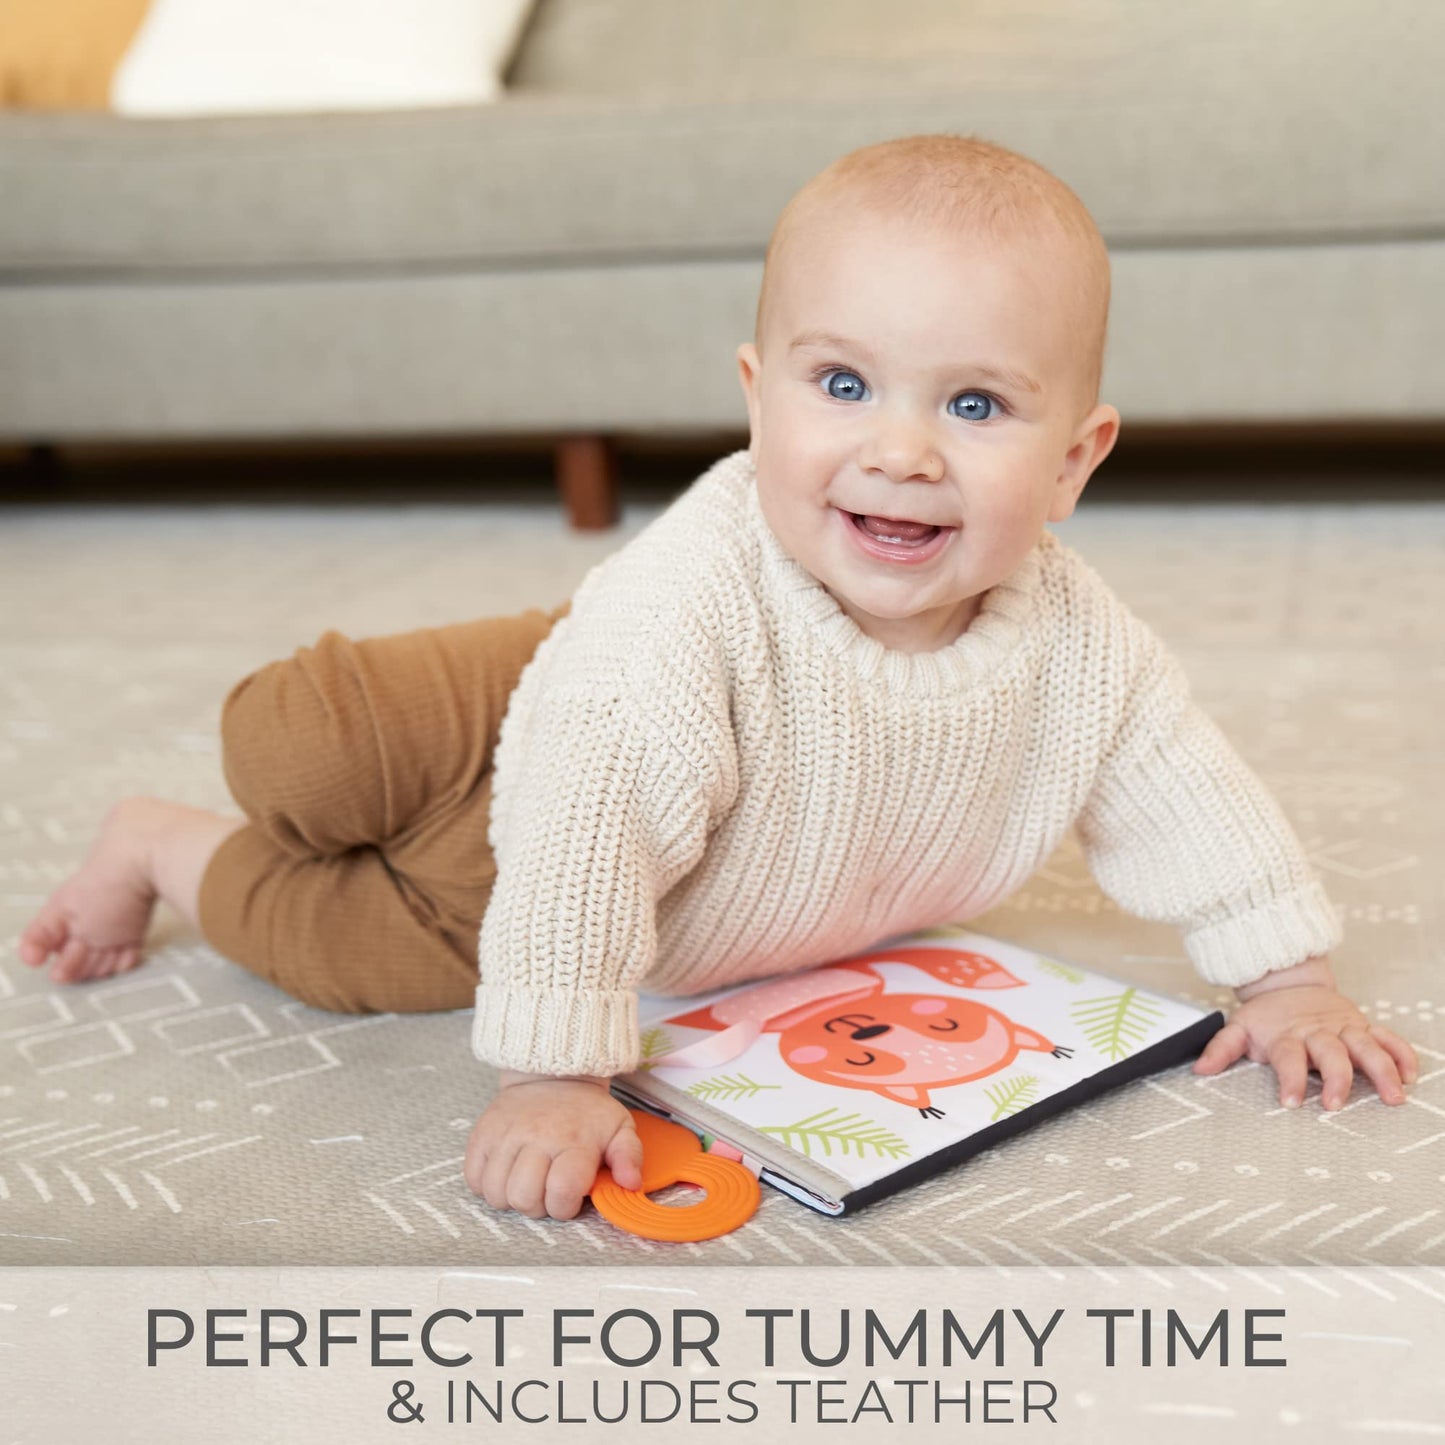 ZICOTO Soft Tummy Time Book with Large Stimulating Baby Safe Mirror - High Contrast Montessori Sensory Developmental Toy for Newborn/Infant 0-3 & 3-6 Months